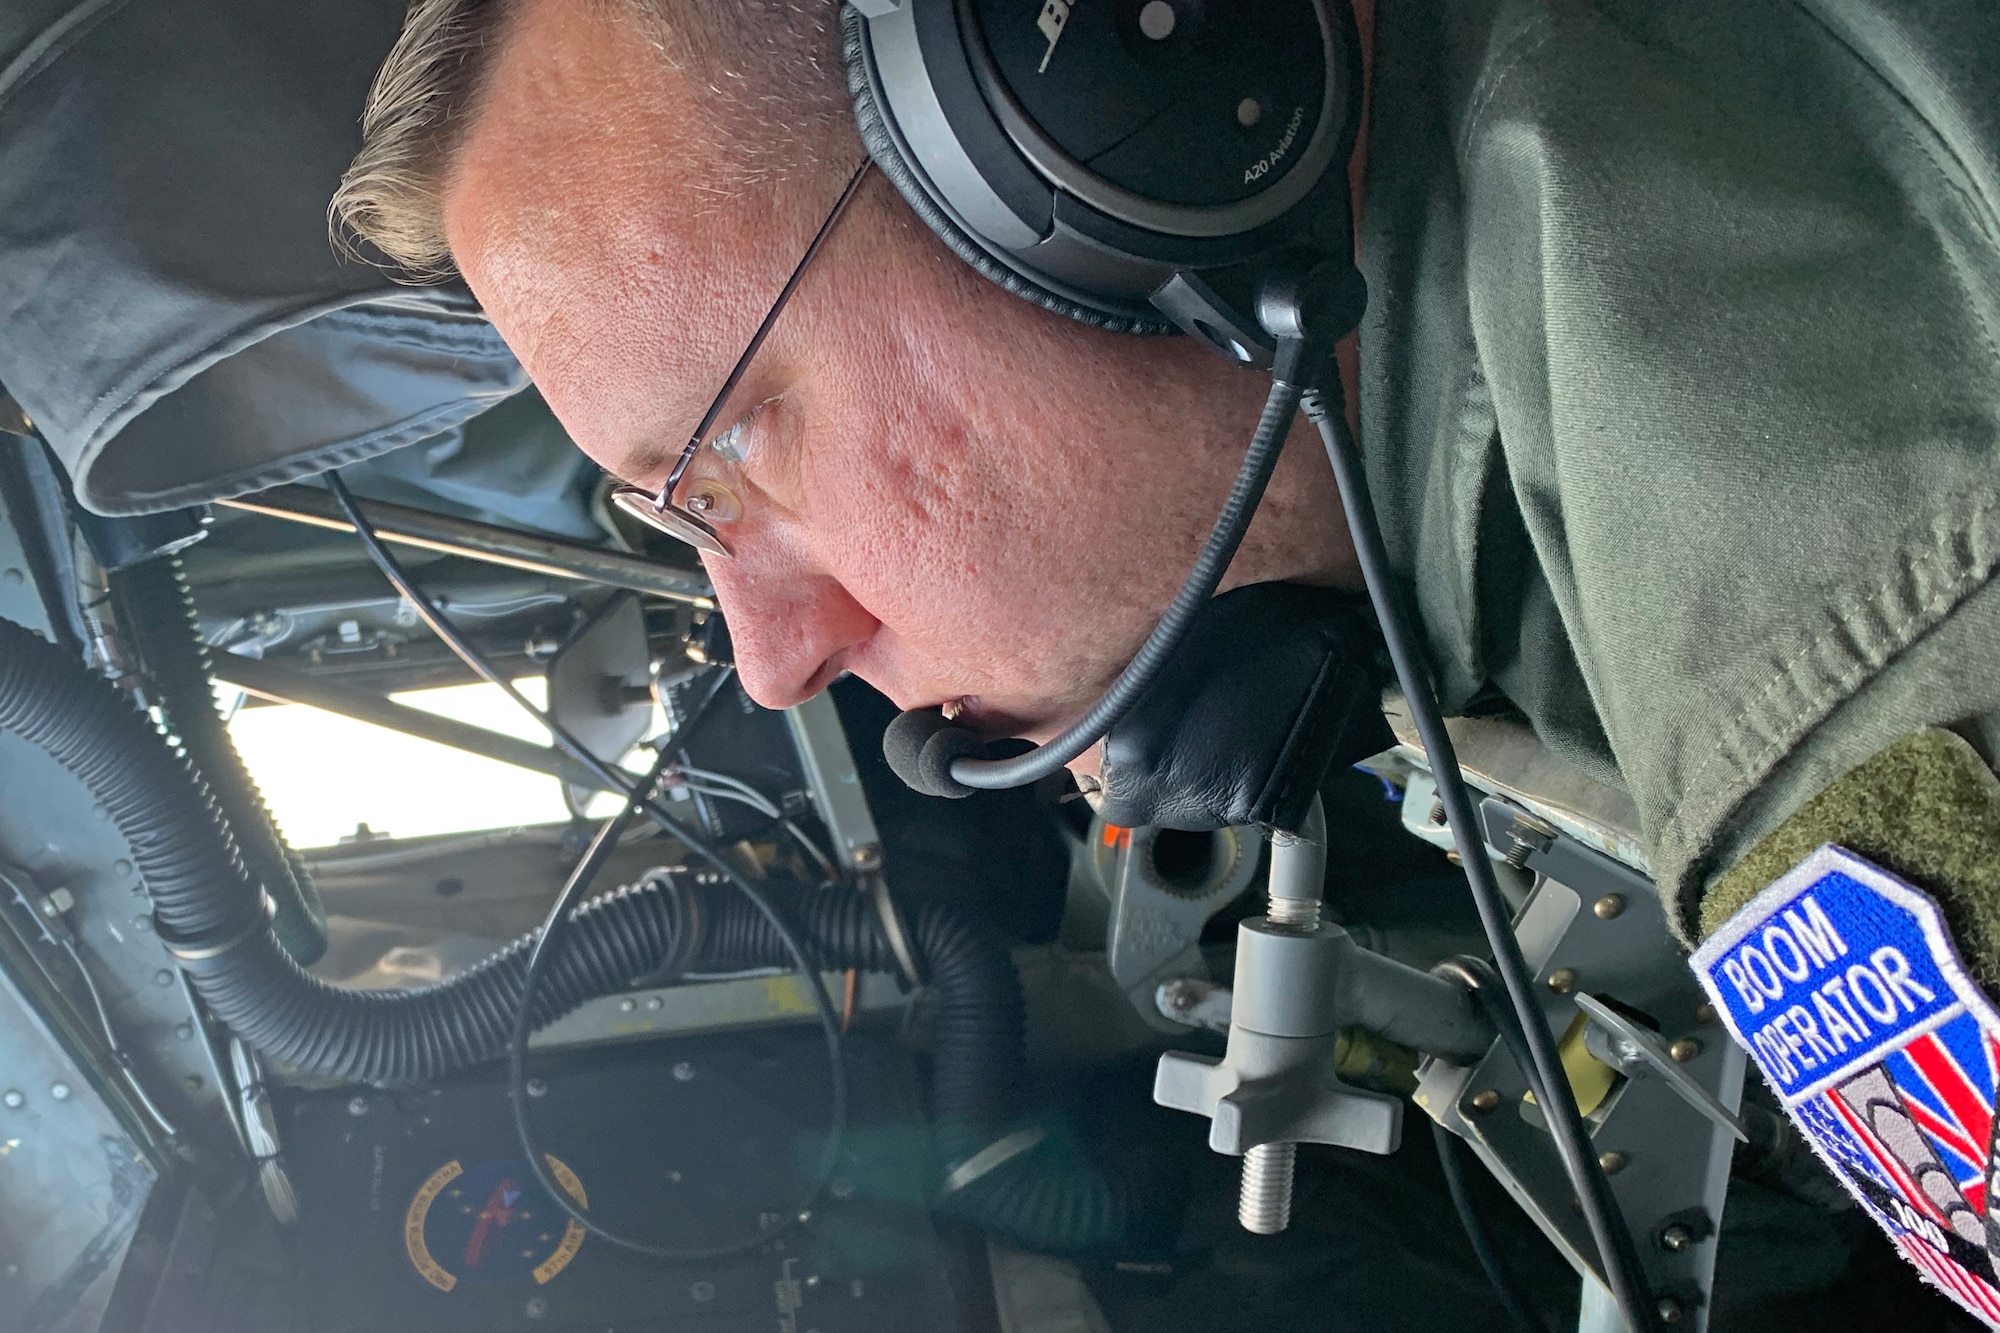 U.S. Air Force Master Sgt. Chad Holloway, 351st Air Refueling Wing boom operator, prepares the boom to refuel receiving aircraft over the North Sea during exercise Cobra Warrior 22, Sept. 21, 2022. The U.S. Air Force is engaged, postured, and ready with credible force to assure, deter and defend in an increasingly complex security environment. (U.S. Air Force photo by Tech. Sgt. Anthony Hetlage)